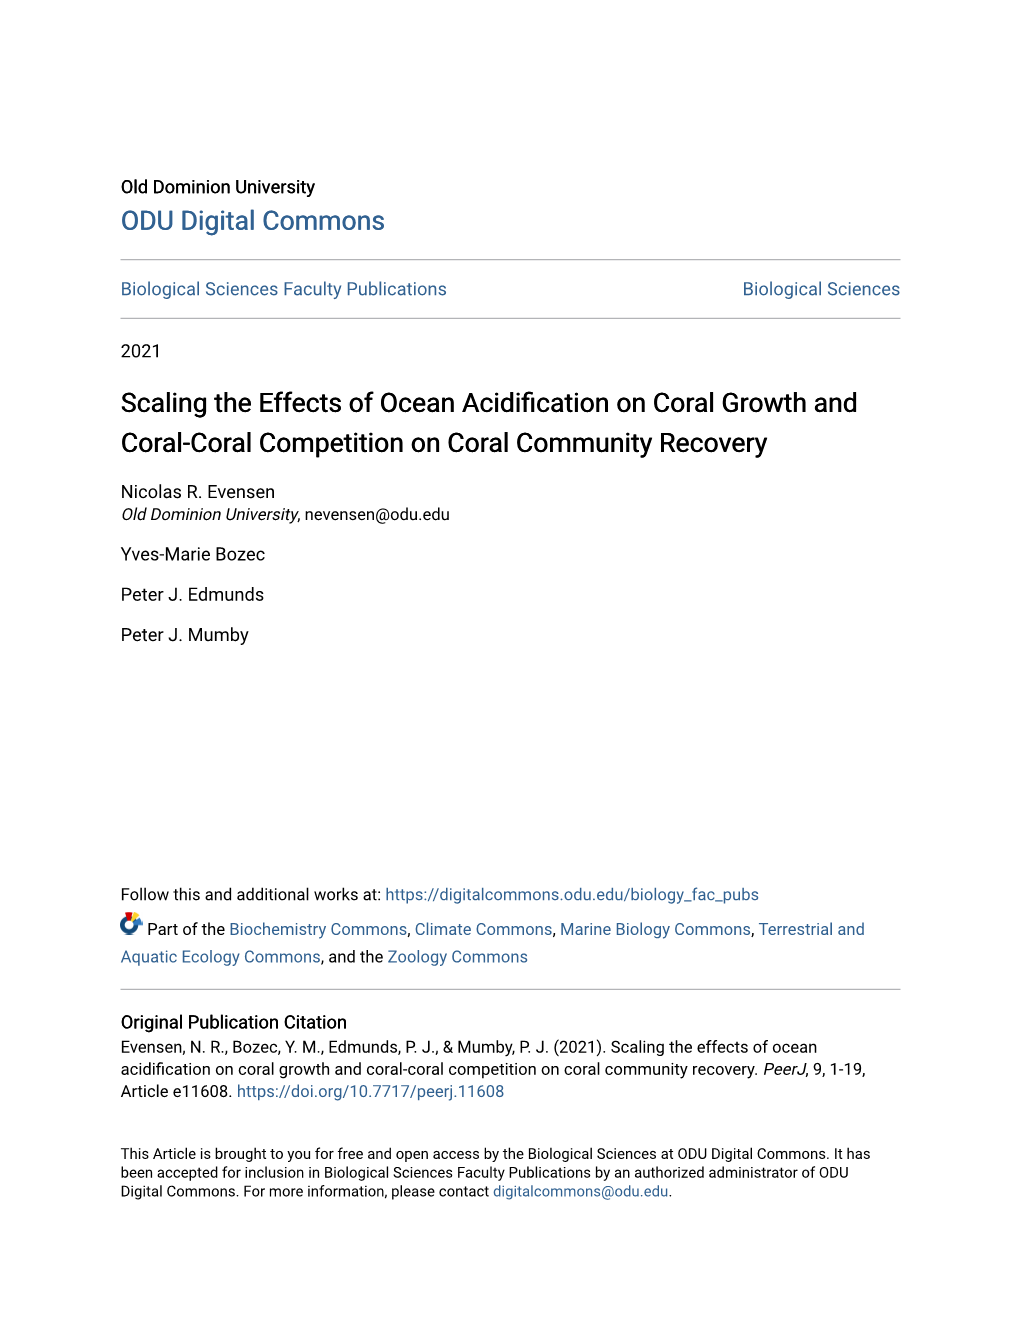 Scaling the Effects of Ocean Acidification on Coral Growth and Coral-Coral Competition on Coral Community Recovery